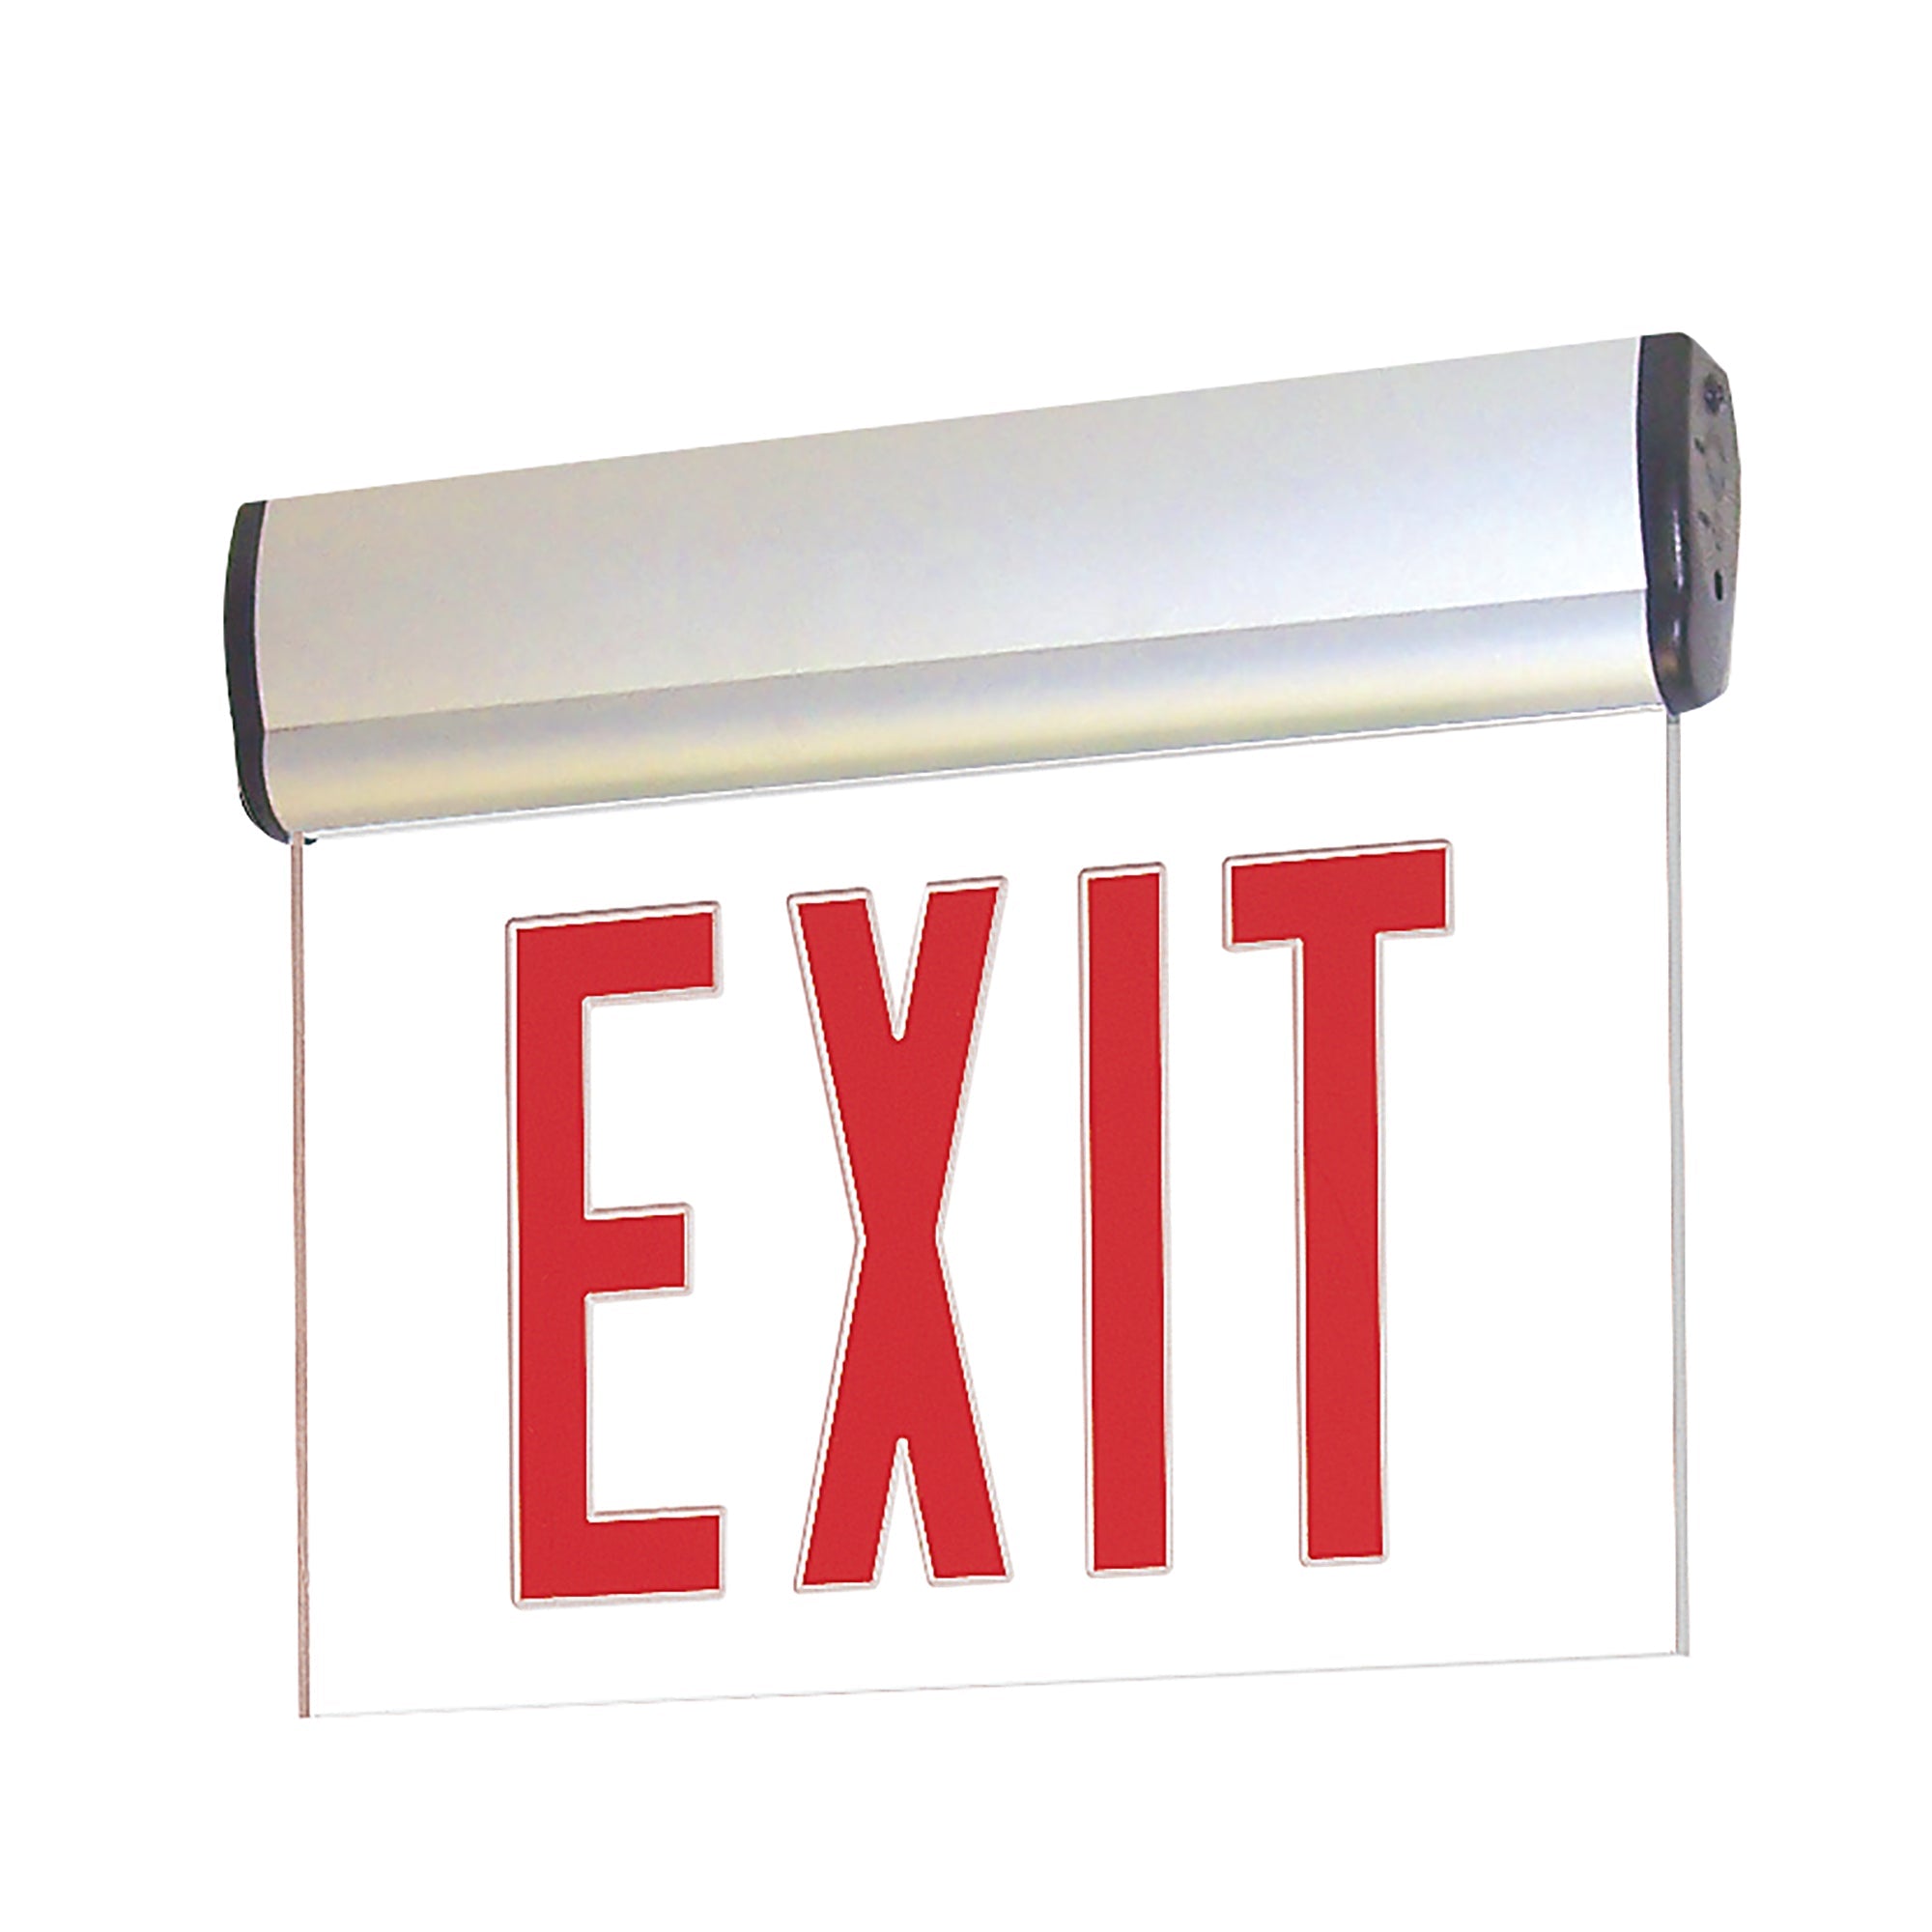 Nora Lighting NX-811-LEDRMA - Exit / Emergency - Surface Adjustable LED Edge-Lit Exit Sign, 2 Circuit, 6 Inch Red Letters, Single Face / Mirrored Acrylic, Aluminum Housing